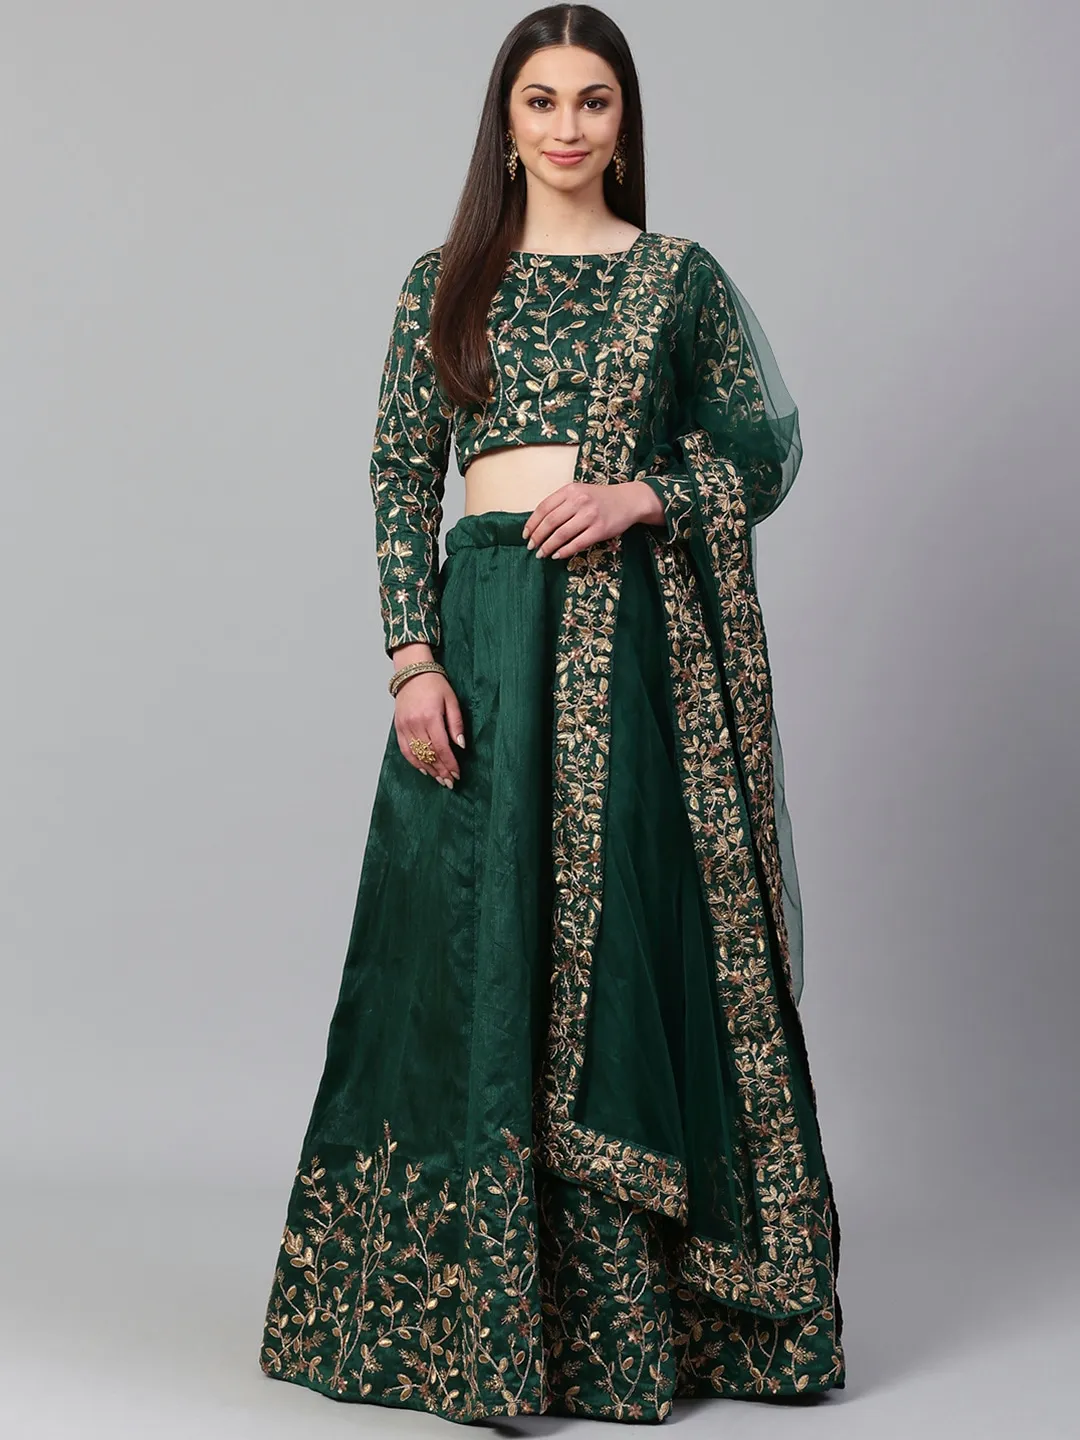 Designer Lehengas Online: Explore the Perfect Outfit for Every Occasion – Readiprint Fashions